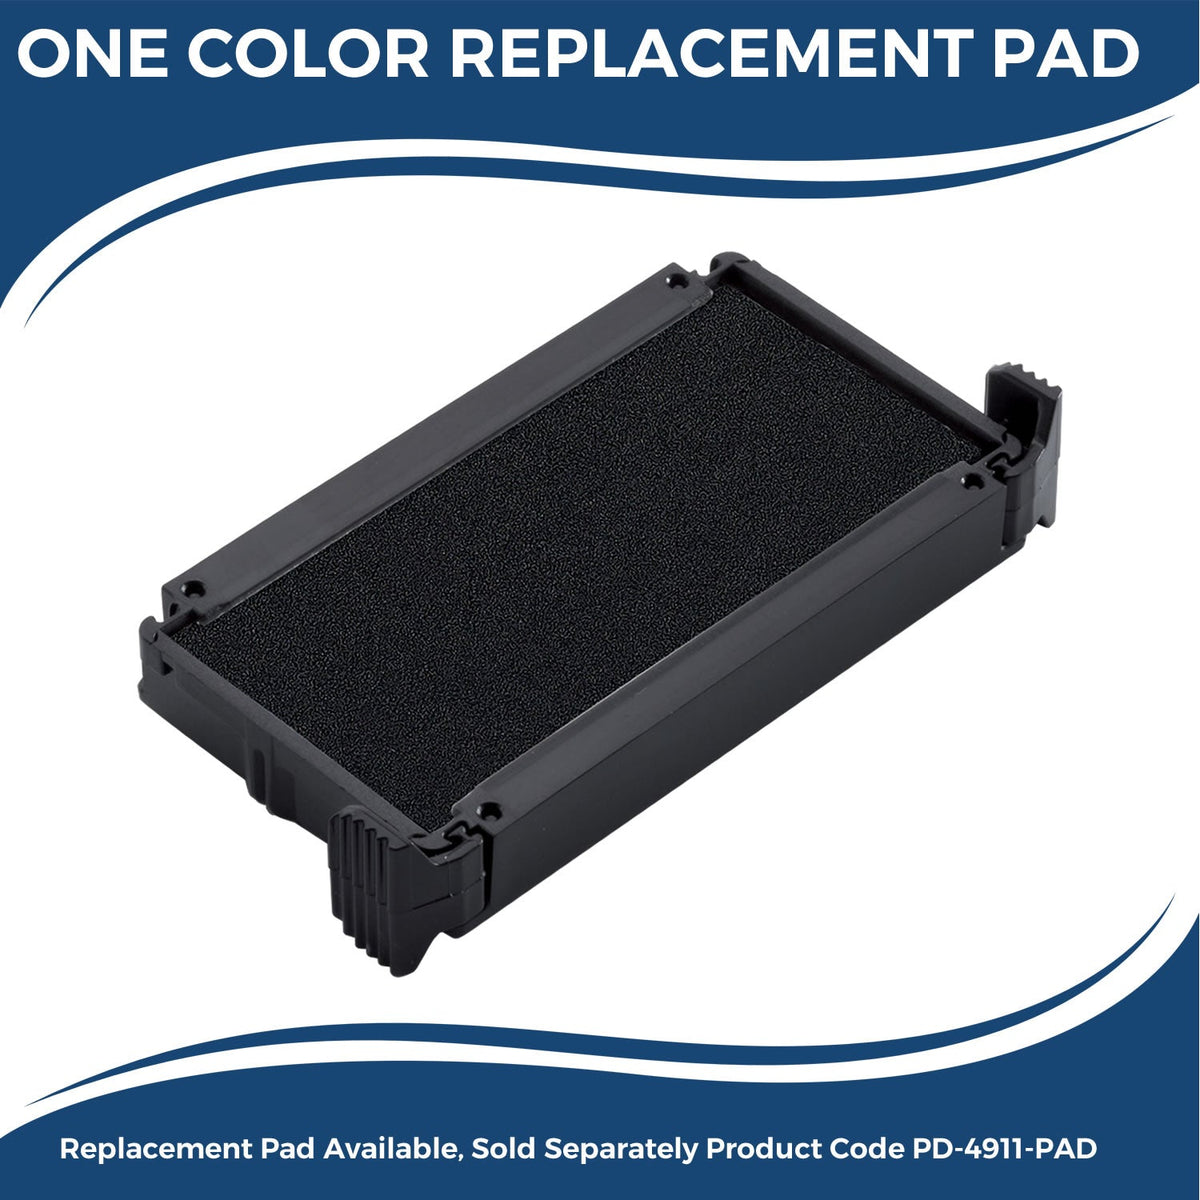 Replacement Pad for Self-Inking Review and Sign Stamp